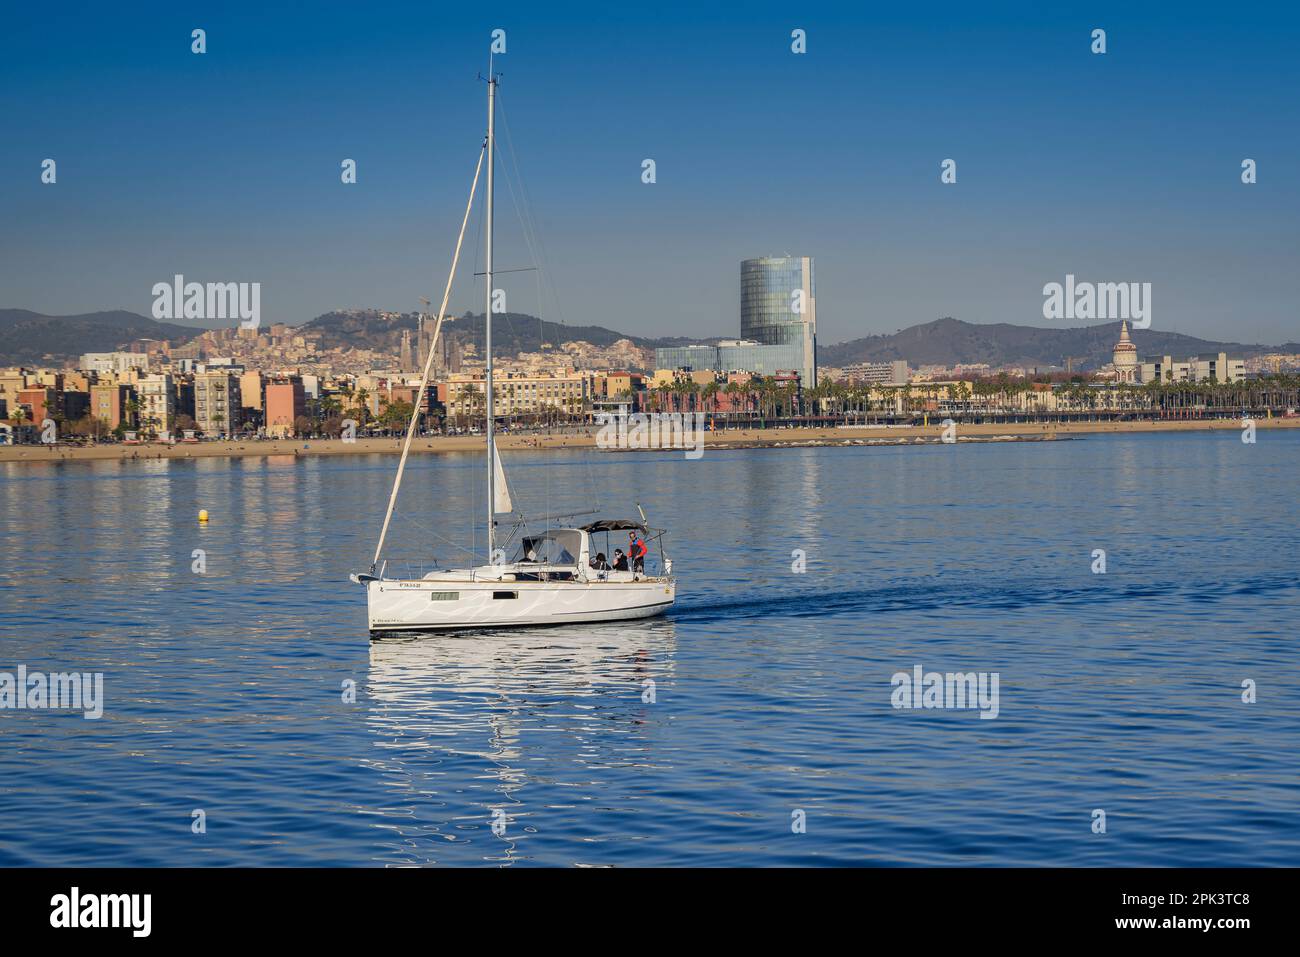 The Marenostrum or Gas Natural tower behind a boat in the sea in Barcelona (Catalonia, Spain) ESP: La torre Marenostrum o de Gas Natural Stock Photo